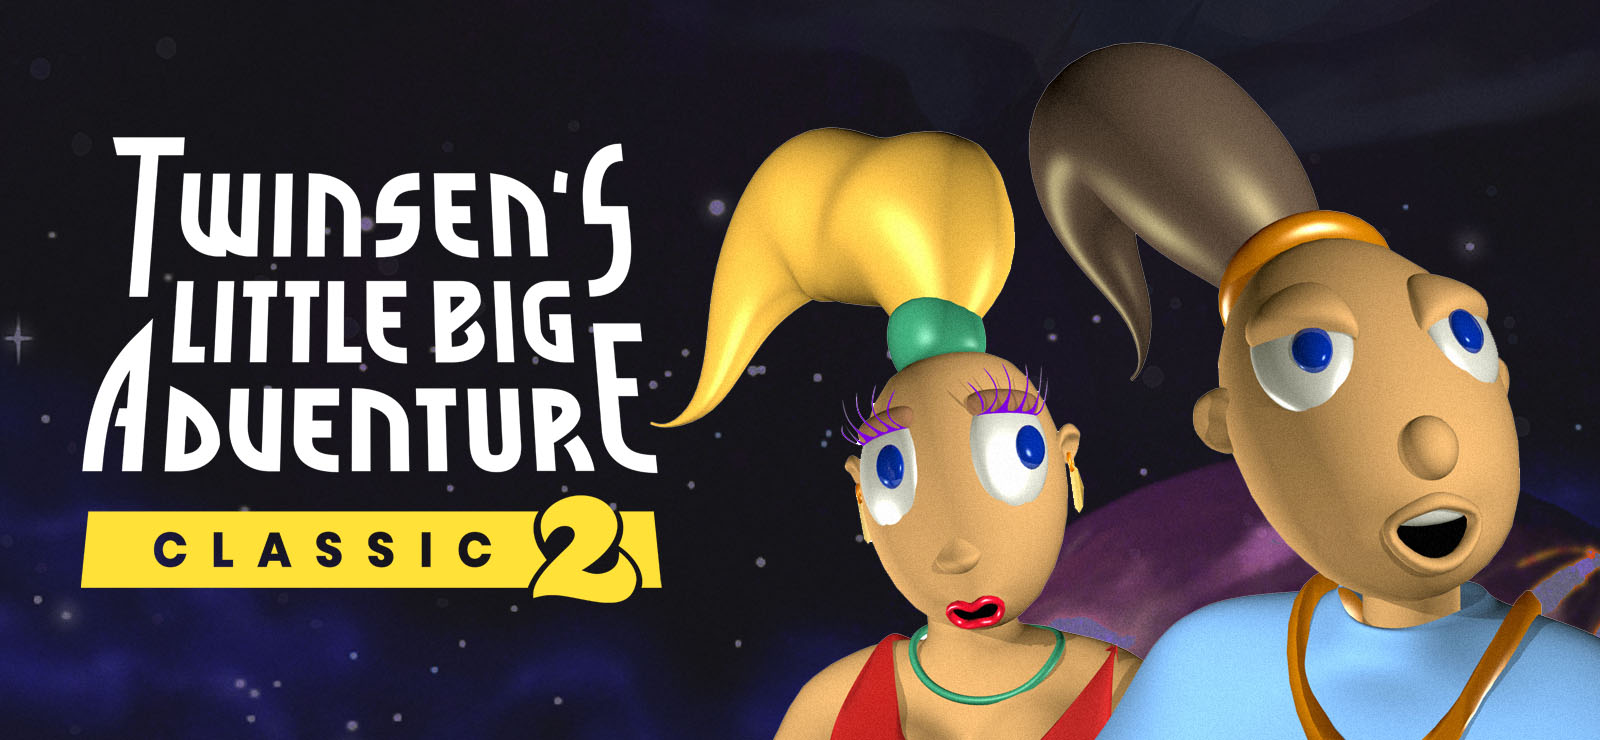 A tiny love letter to the classic Little Big Adventure